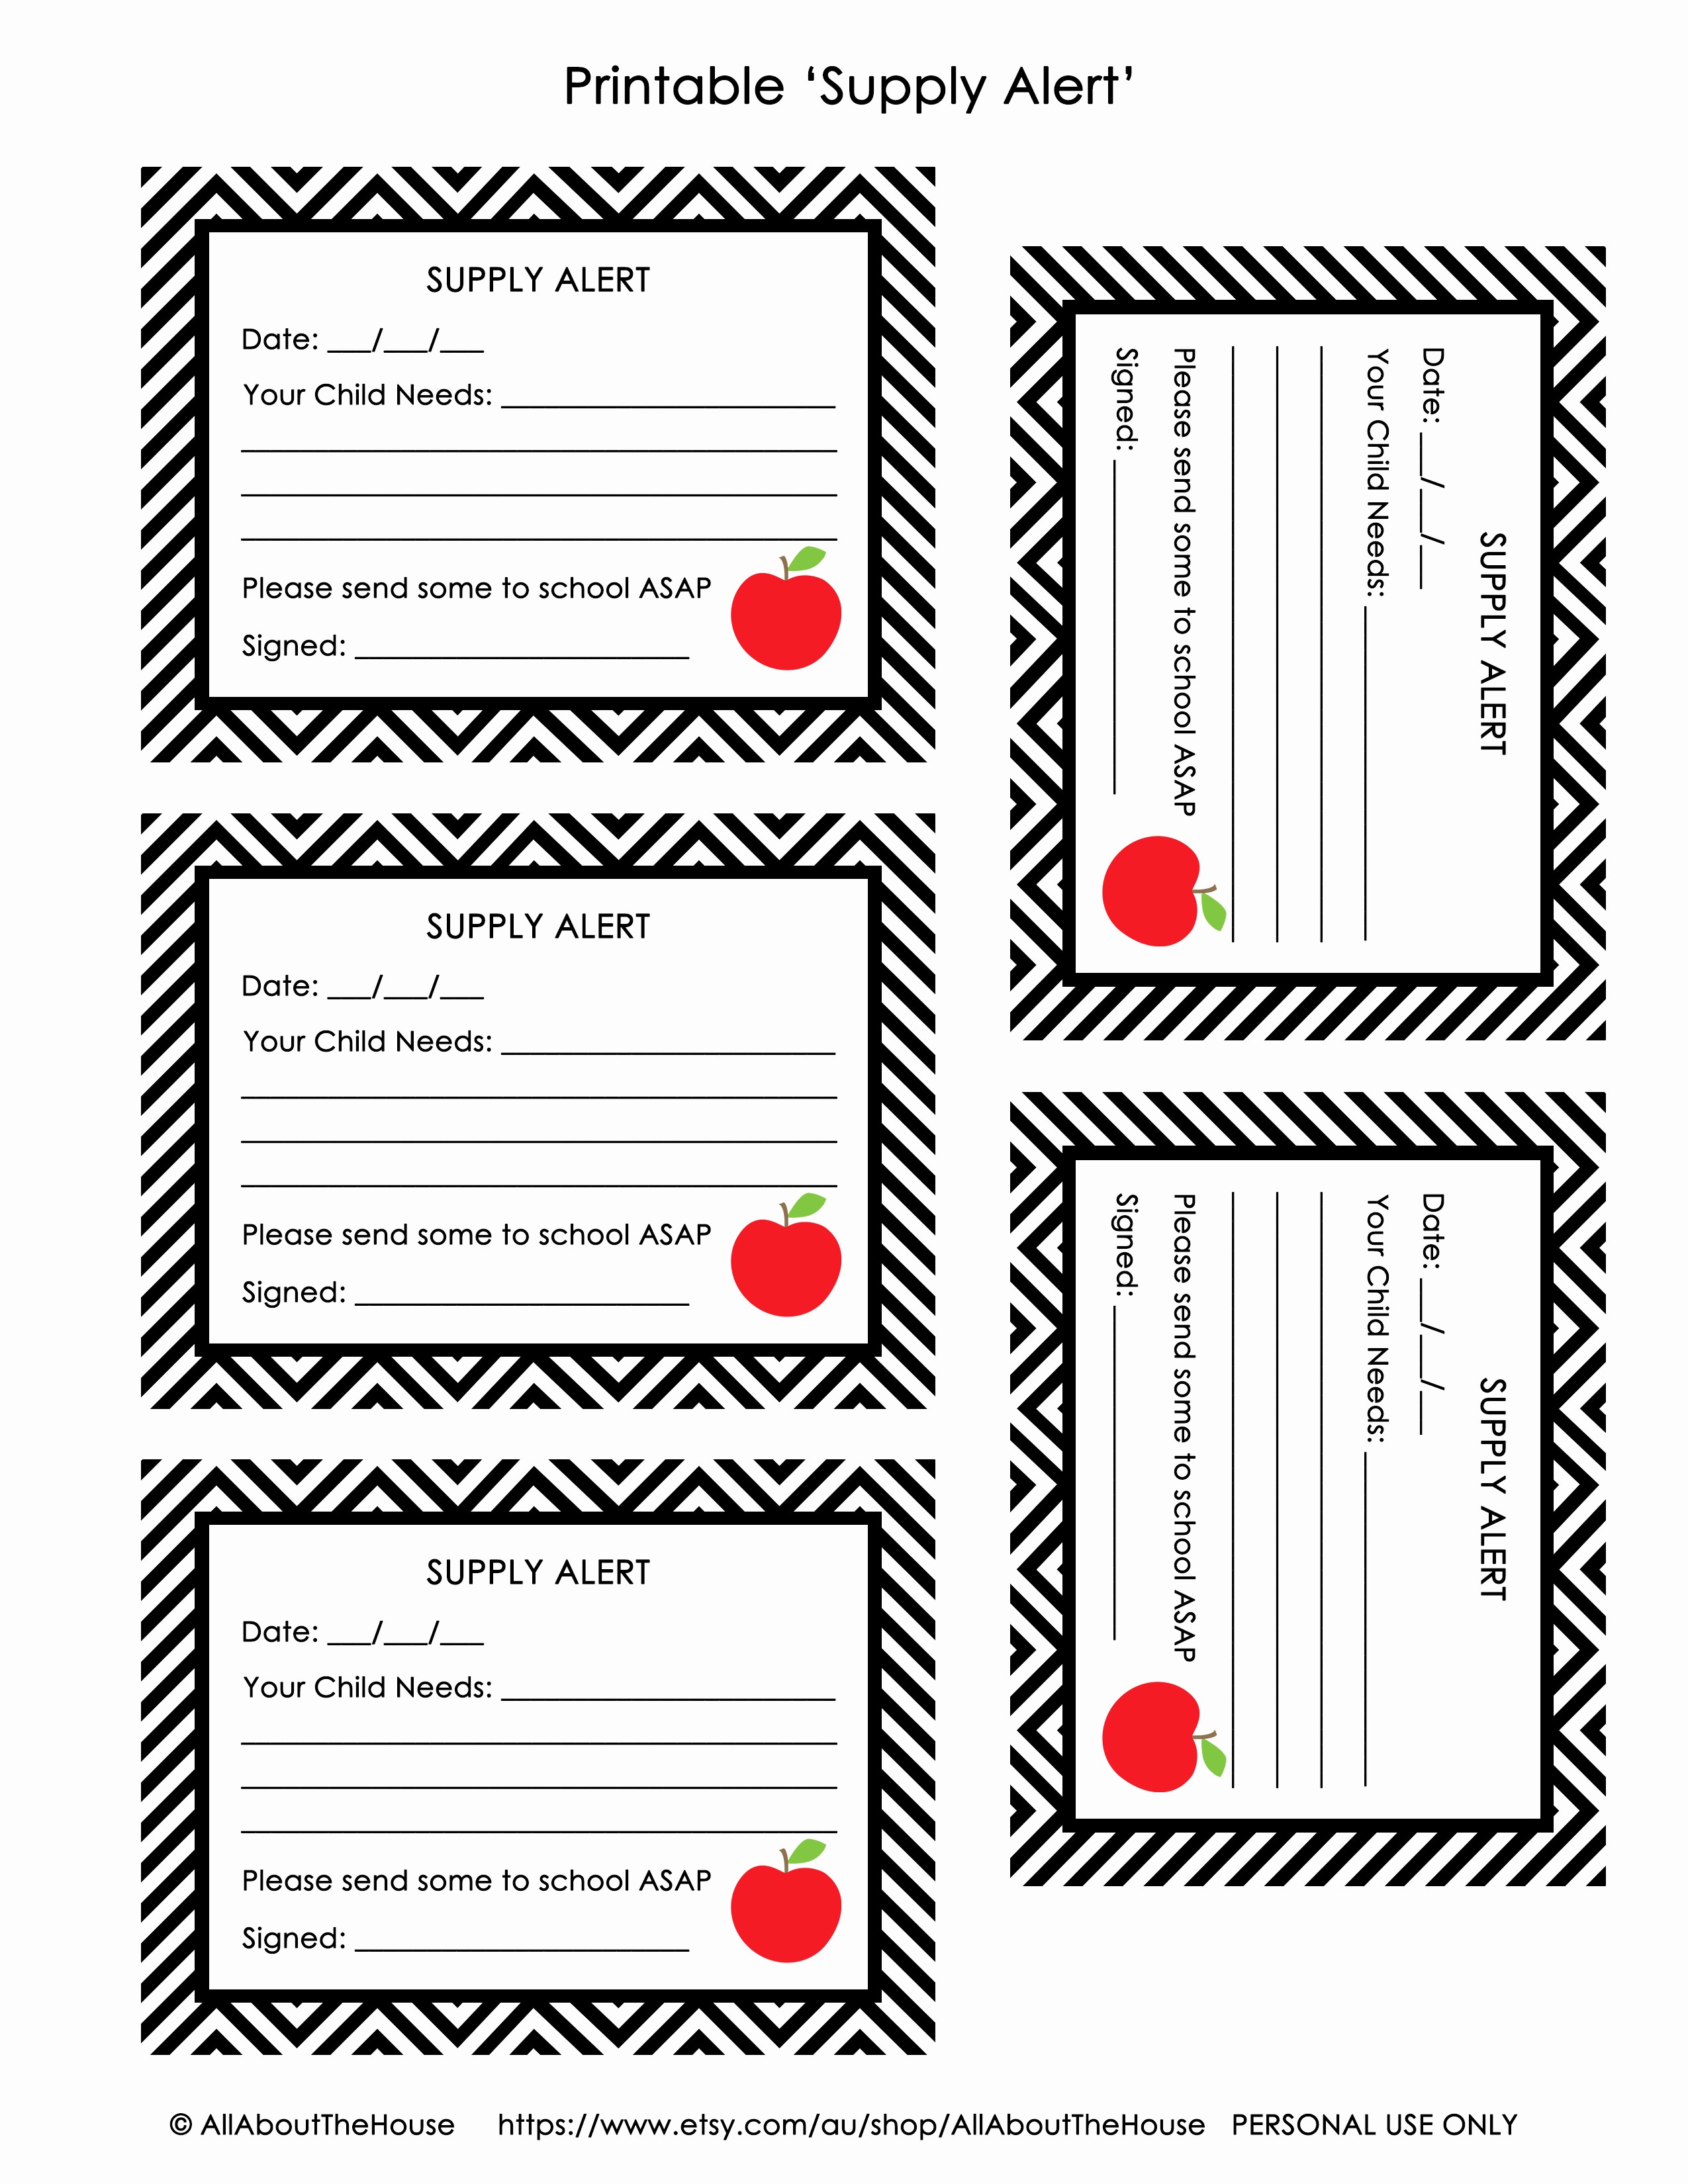 Press Pass Template Microsoft Word Best Of Free Printable Hall Pass and Supply Alert Cards